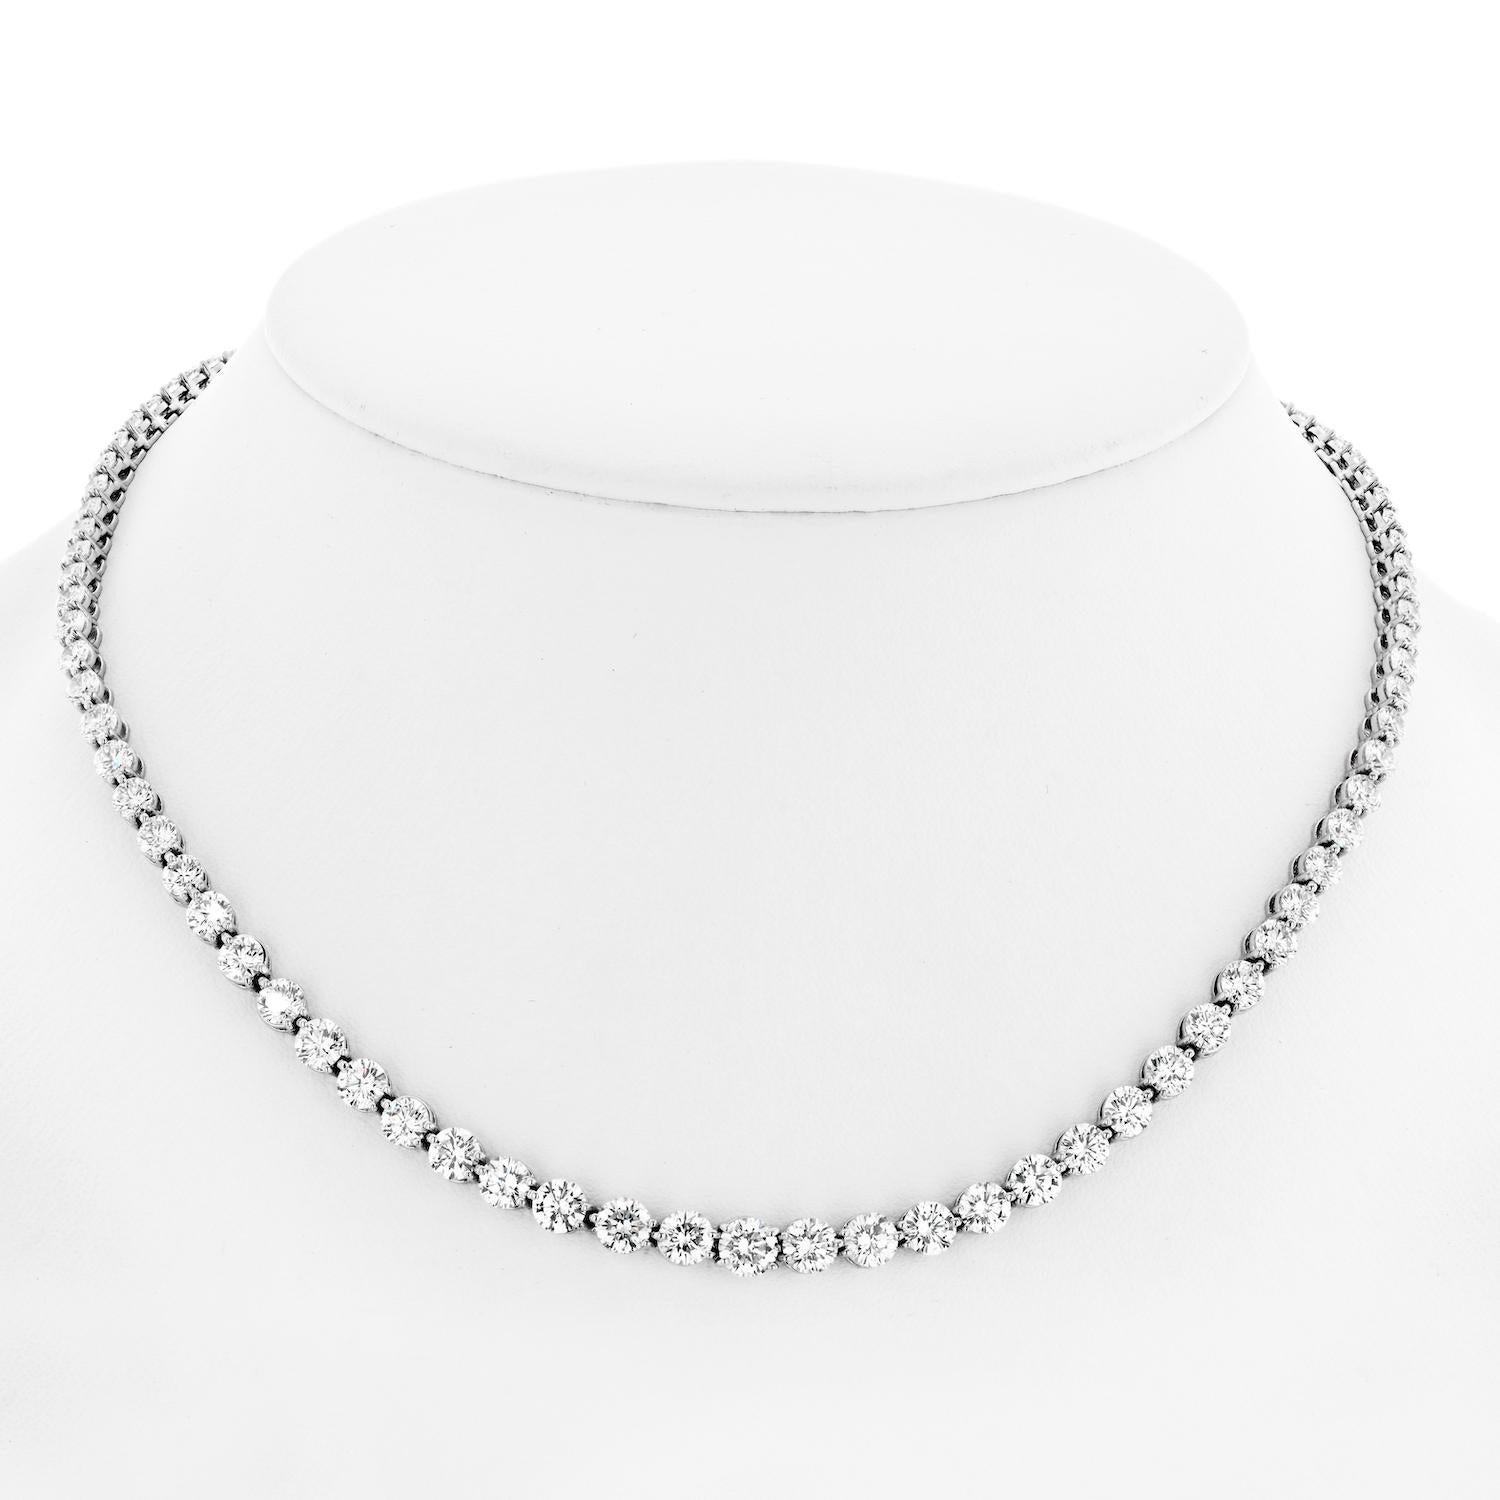 Platinum Tiffany & Co. 21.70cttw Victoria Round Cut Diamond Tennis Necklace.

Inspired by the fire and radiance of our superlative diamonds, Tiffany Victoria uses a unique combination of cuts for a distinctly romantic sensibility. This classic line